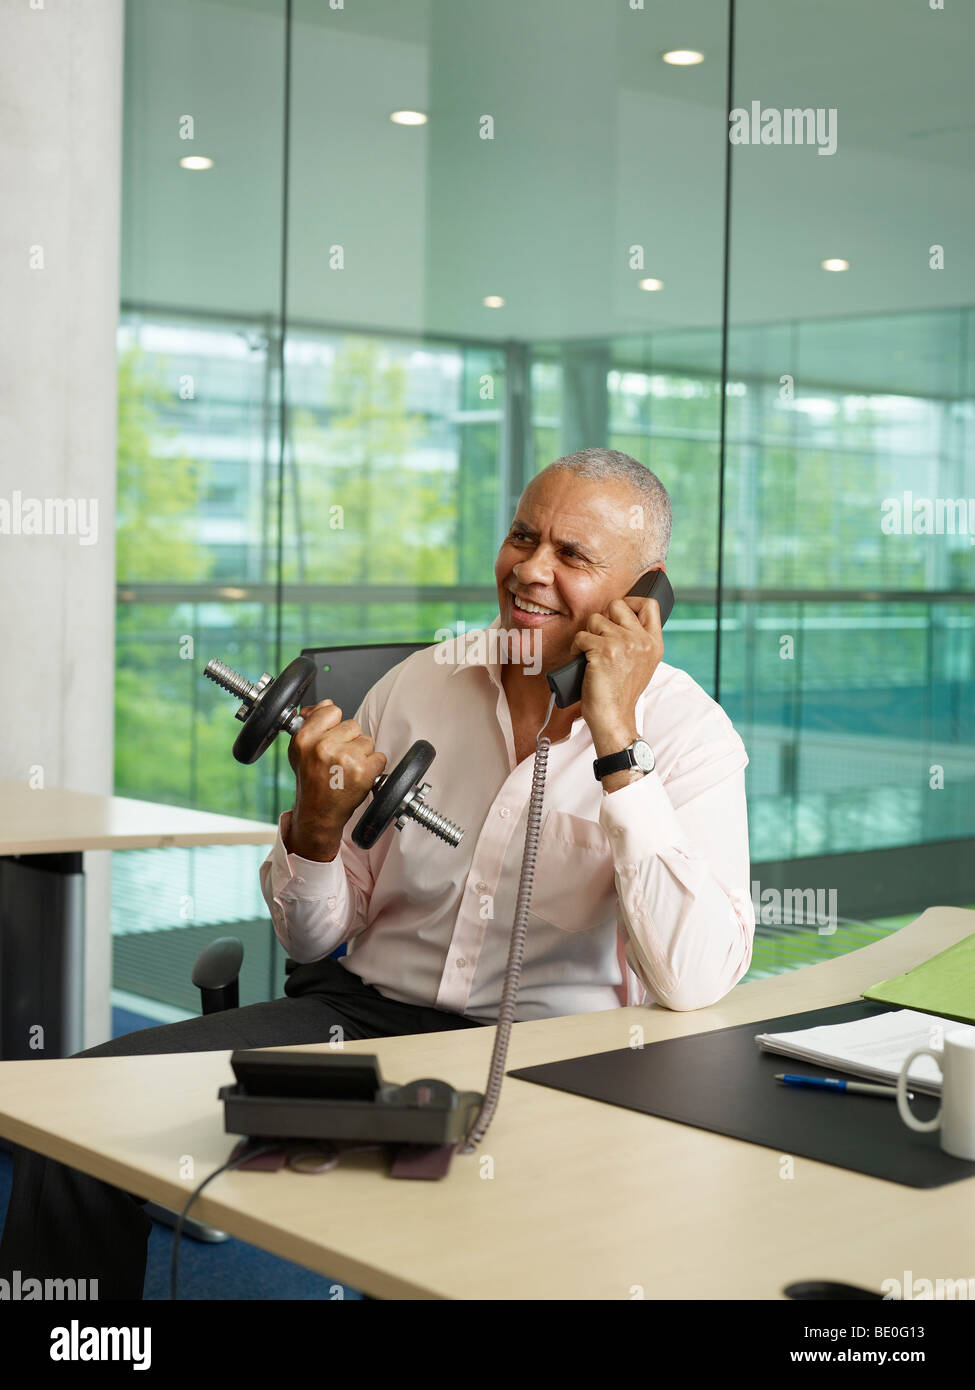 A man exercises while on the phone Stock Photo